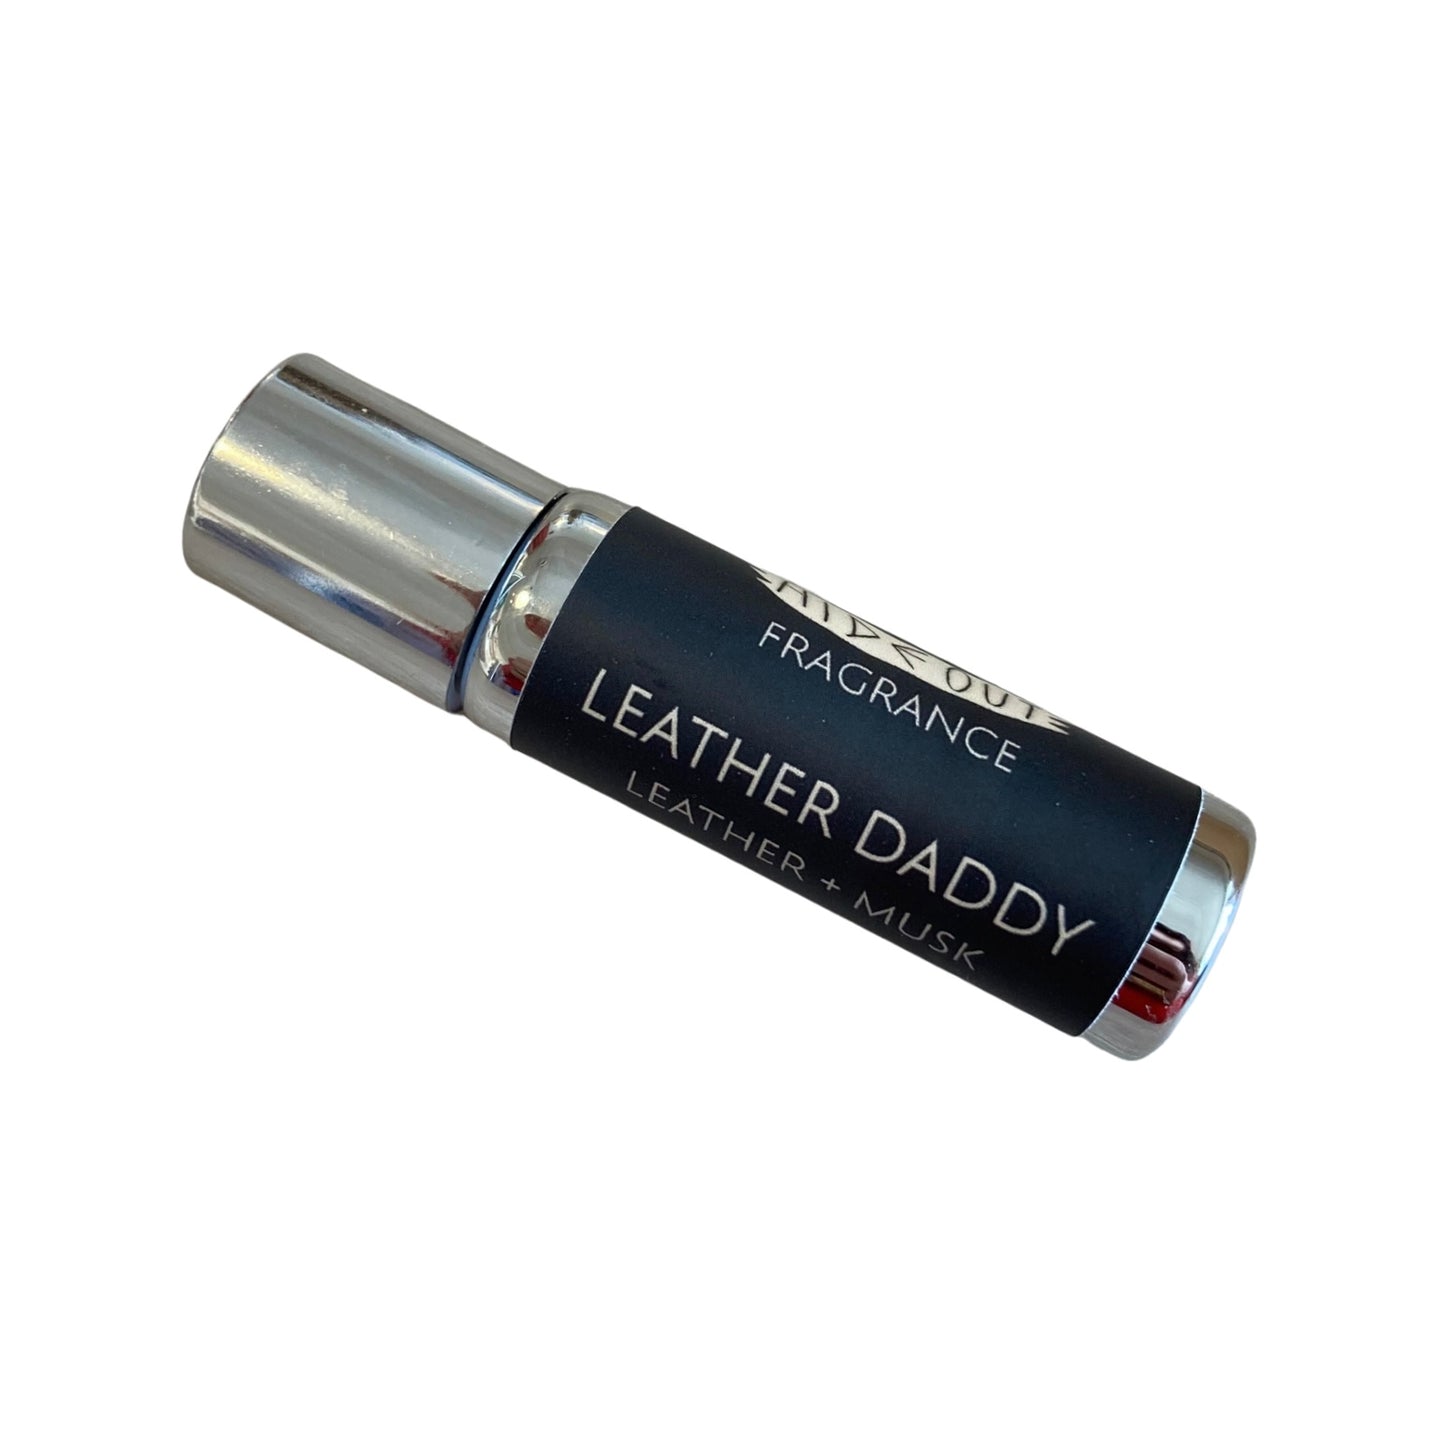 Perfume Oil Roll-On | Leather Daddy | 5mL